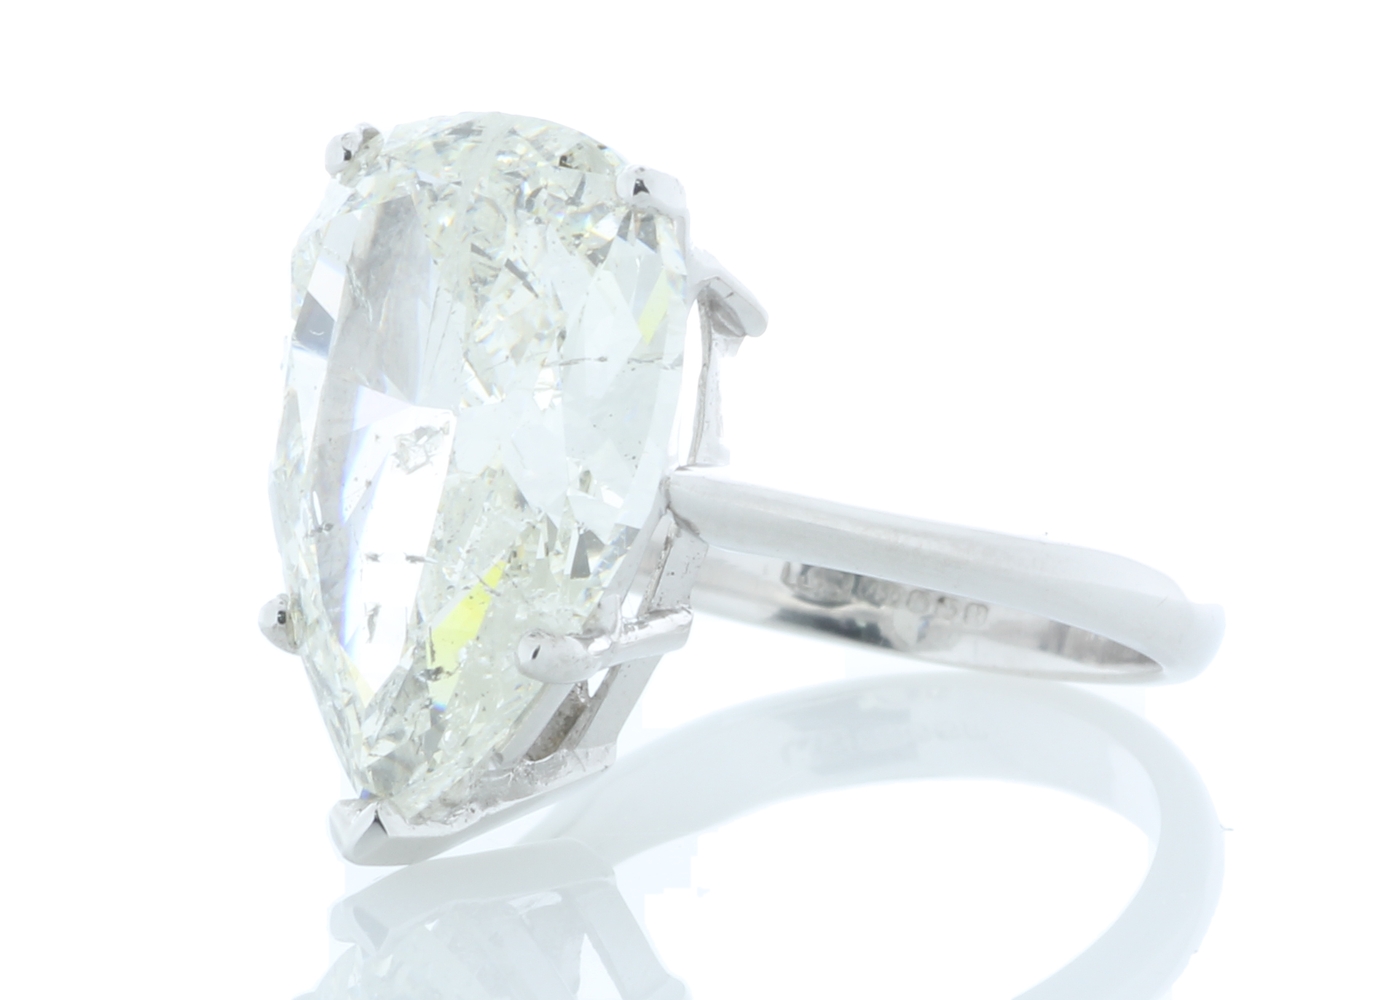 18ct White Gold Pear Shaped Diamond Ring 10.06 Carats - Image 2 of 6